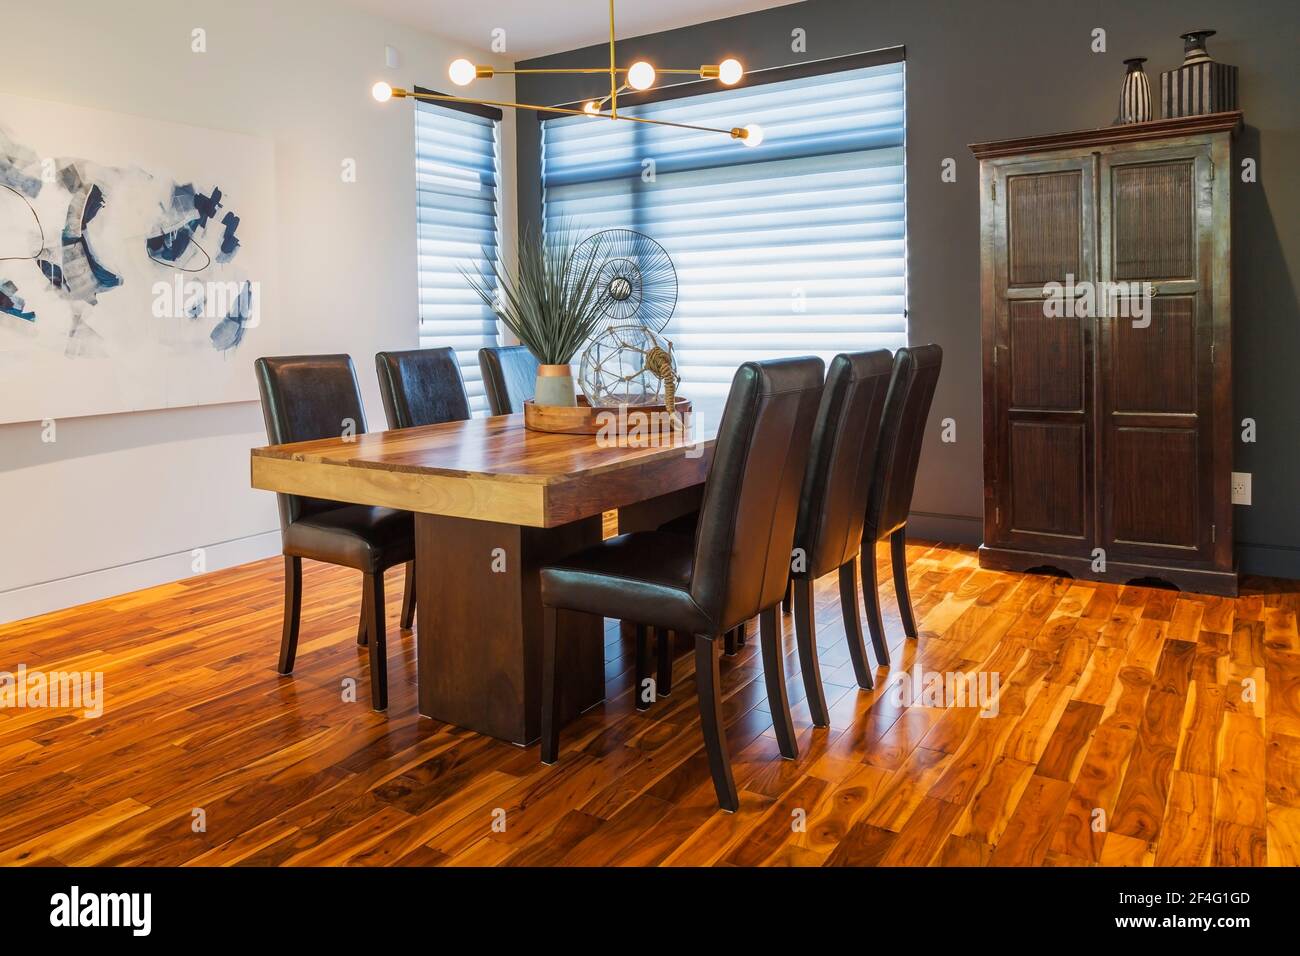 Rosewood dining table with dark brown leather high back chairs and antique  wooden armoire in dining room with acacia wood floorboards Stock Photo -  Alamy